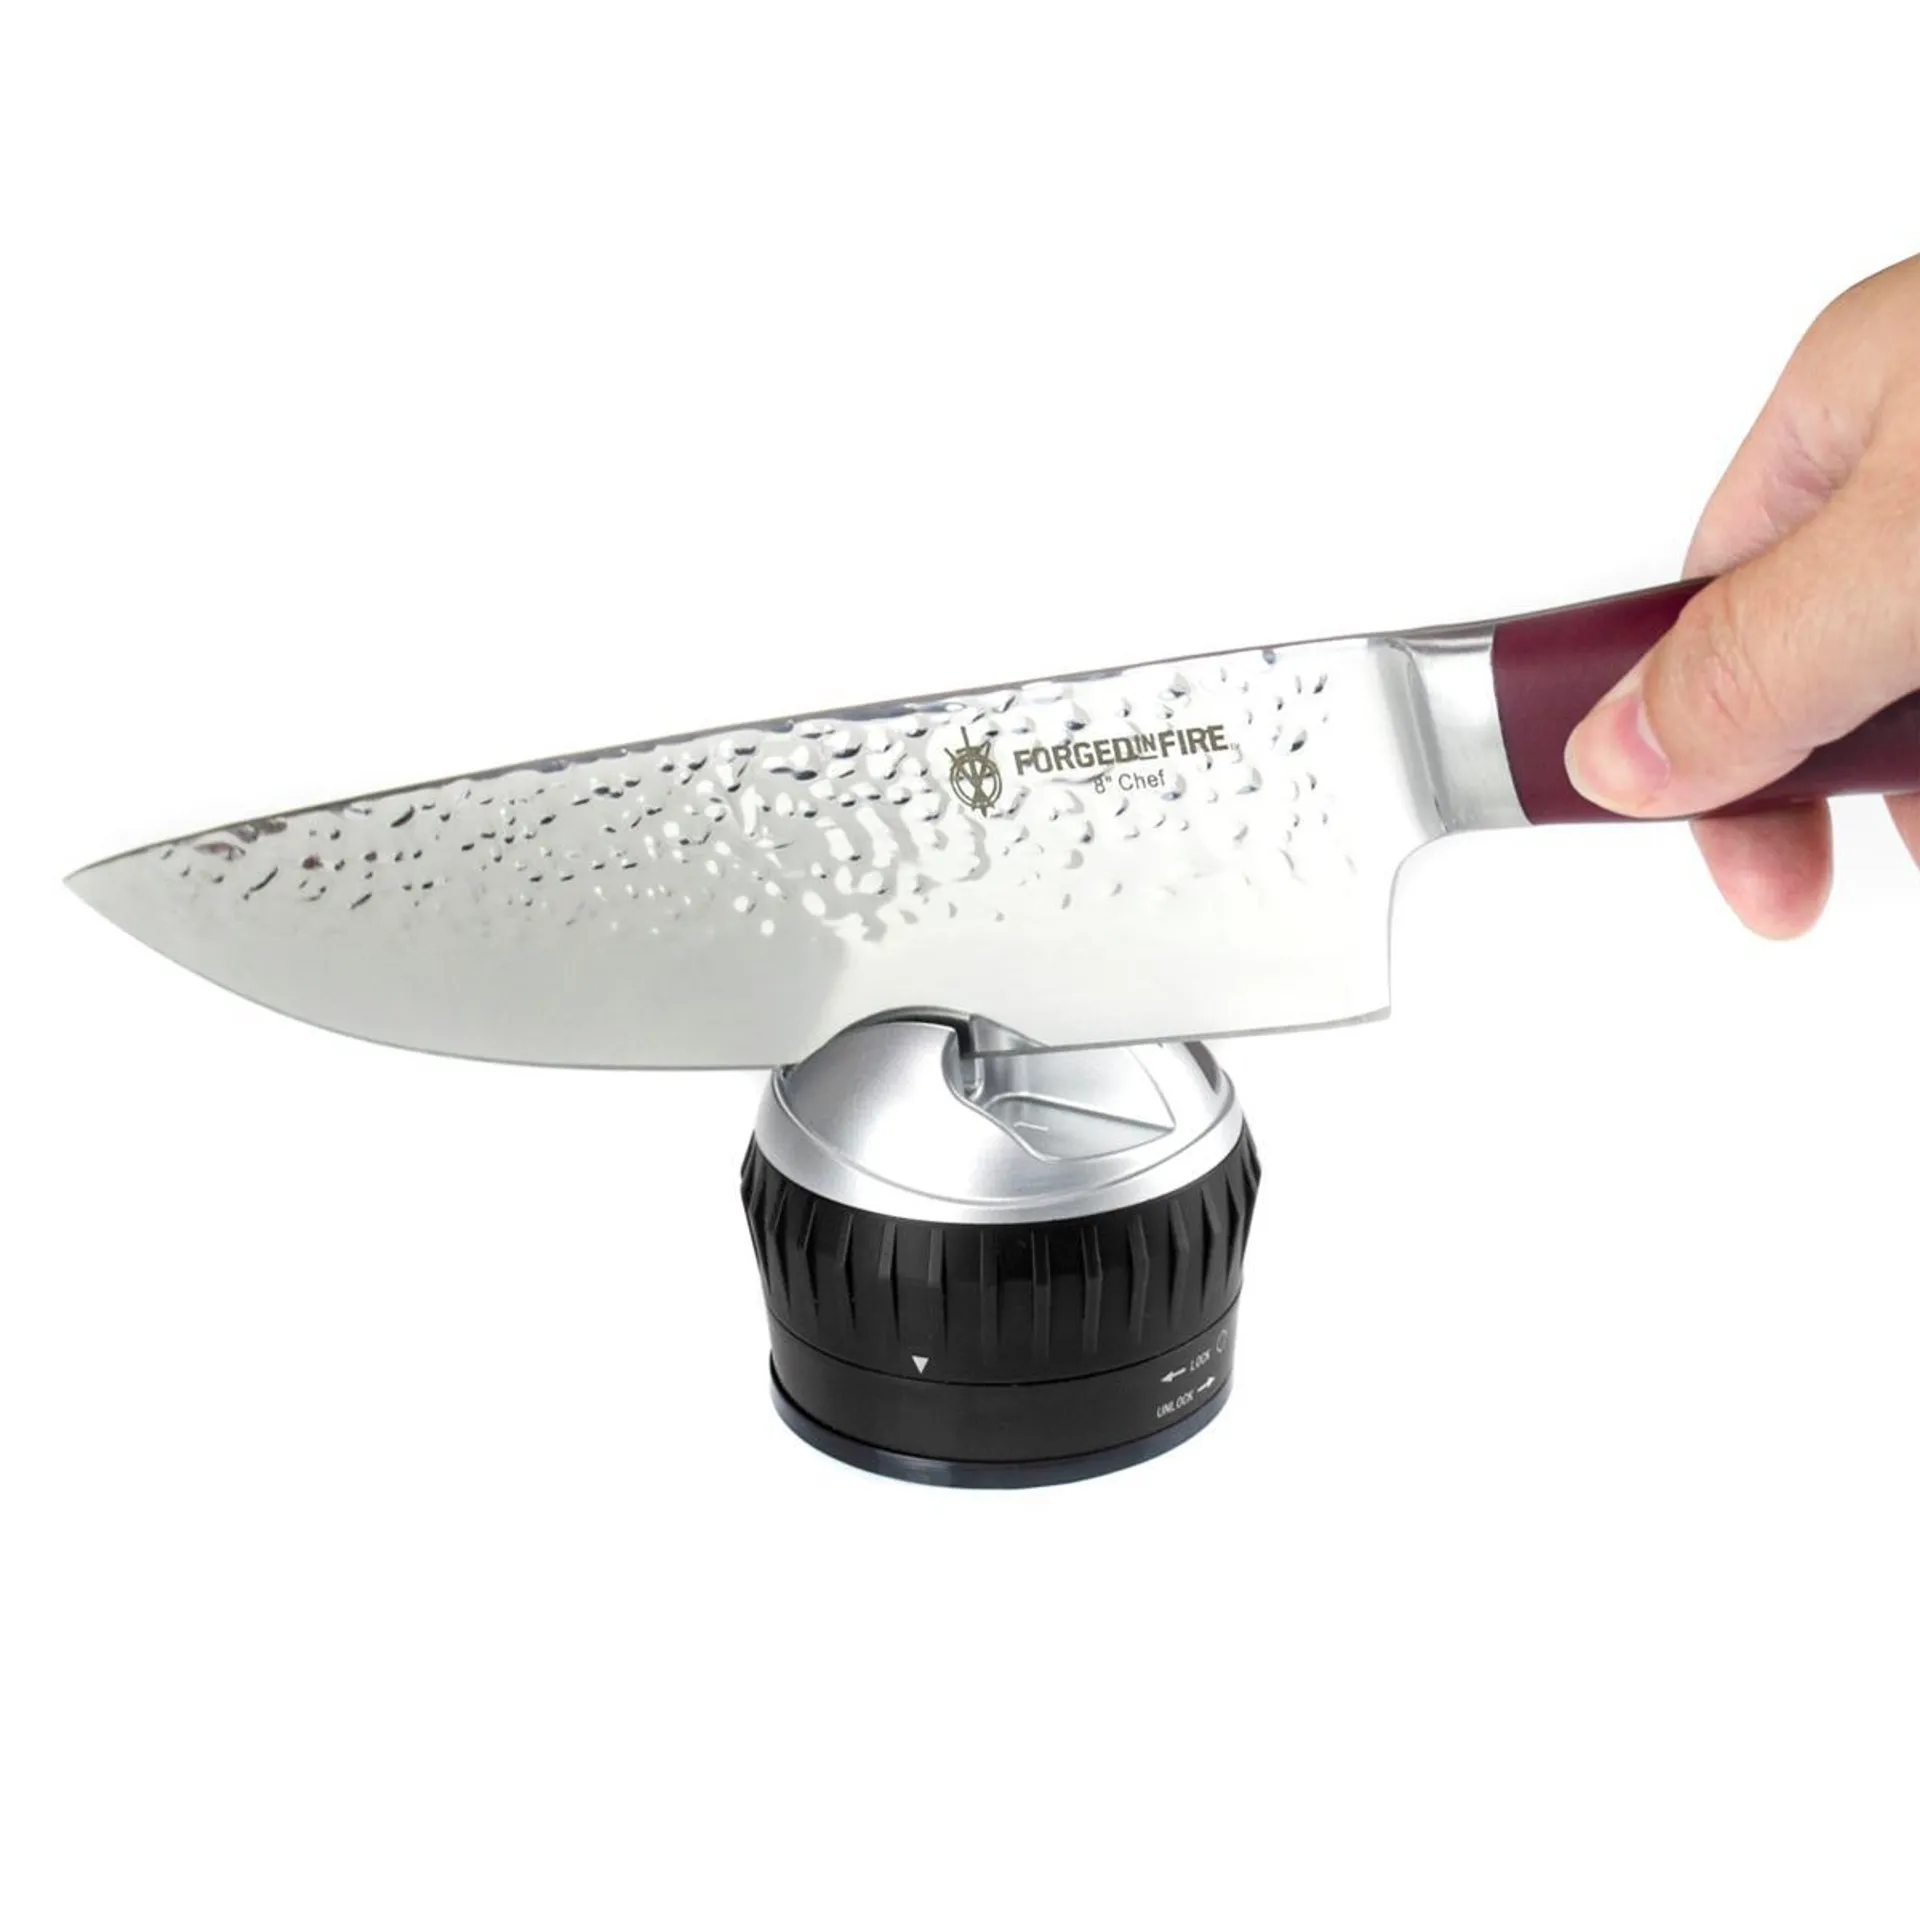 Forged in Fire Knife Sharpener with Suction Pad